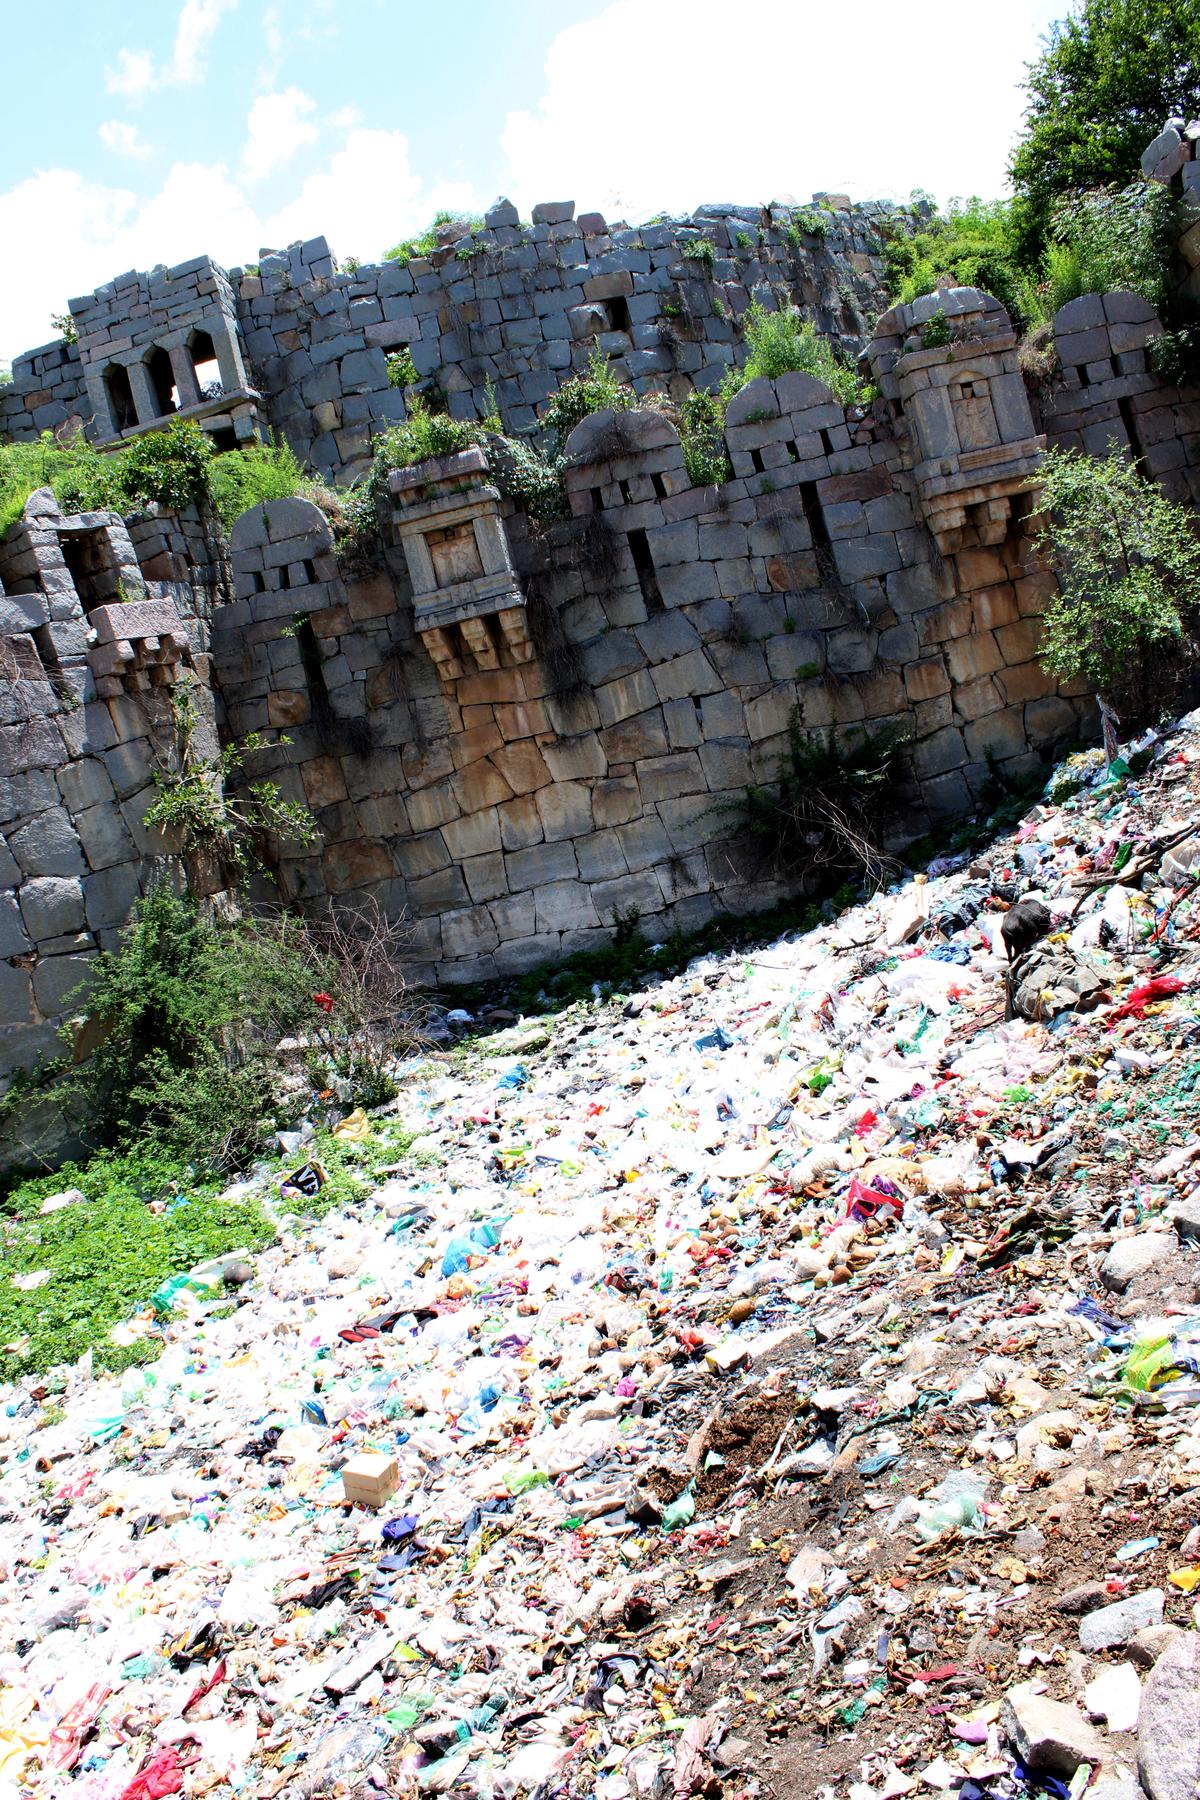 Garbage and plastic waste in the moat around the Mudgal Fort.